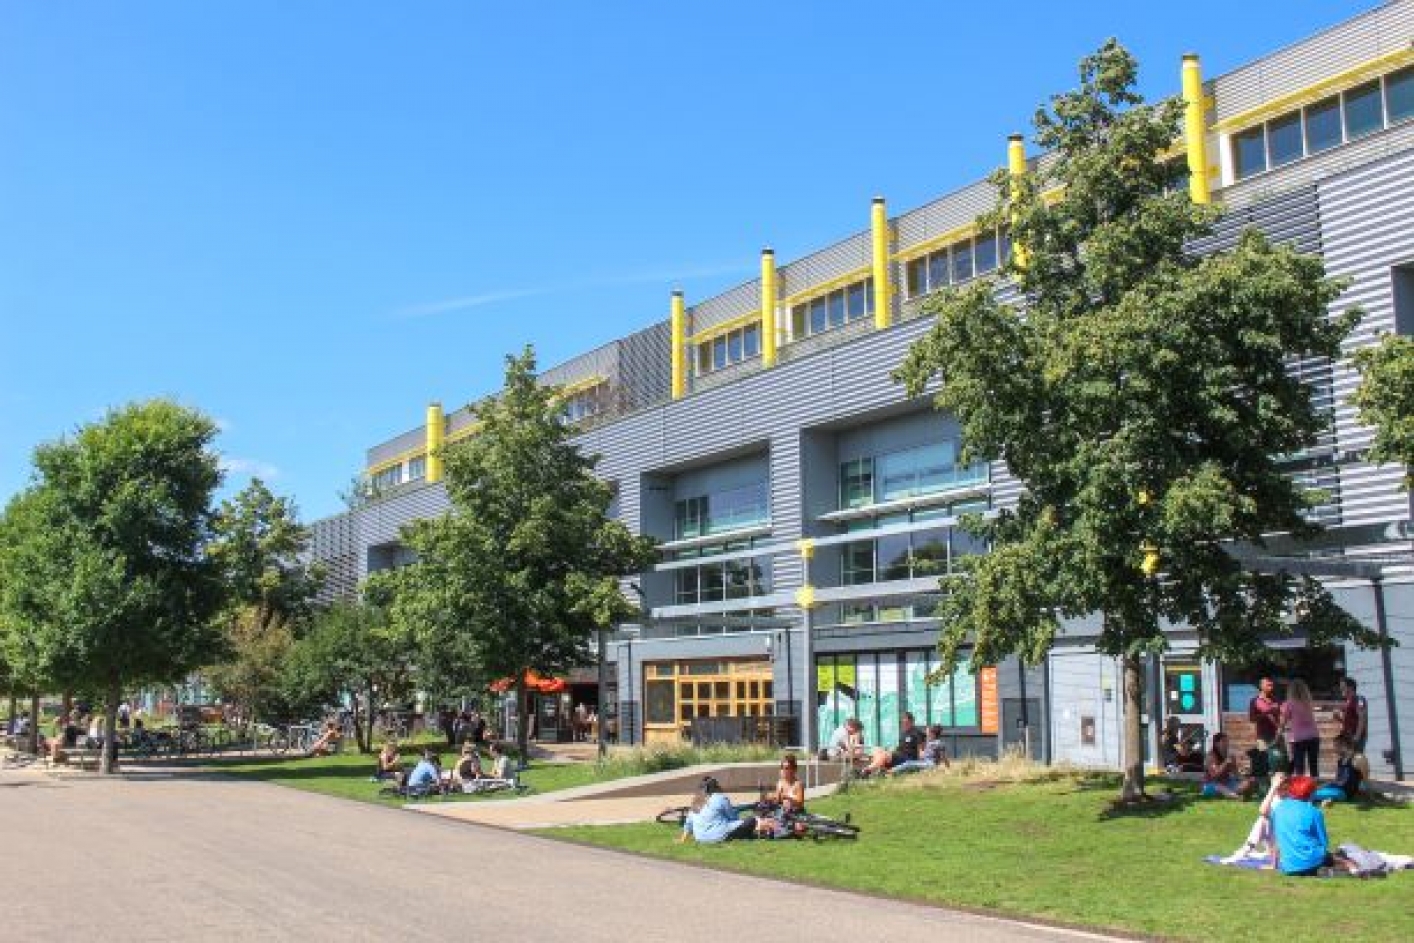 People sitting and reclining on te grass, surrounded by trees in front of building in a business park